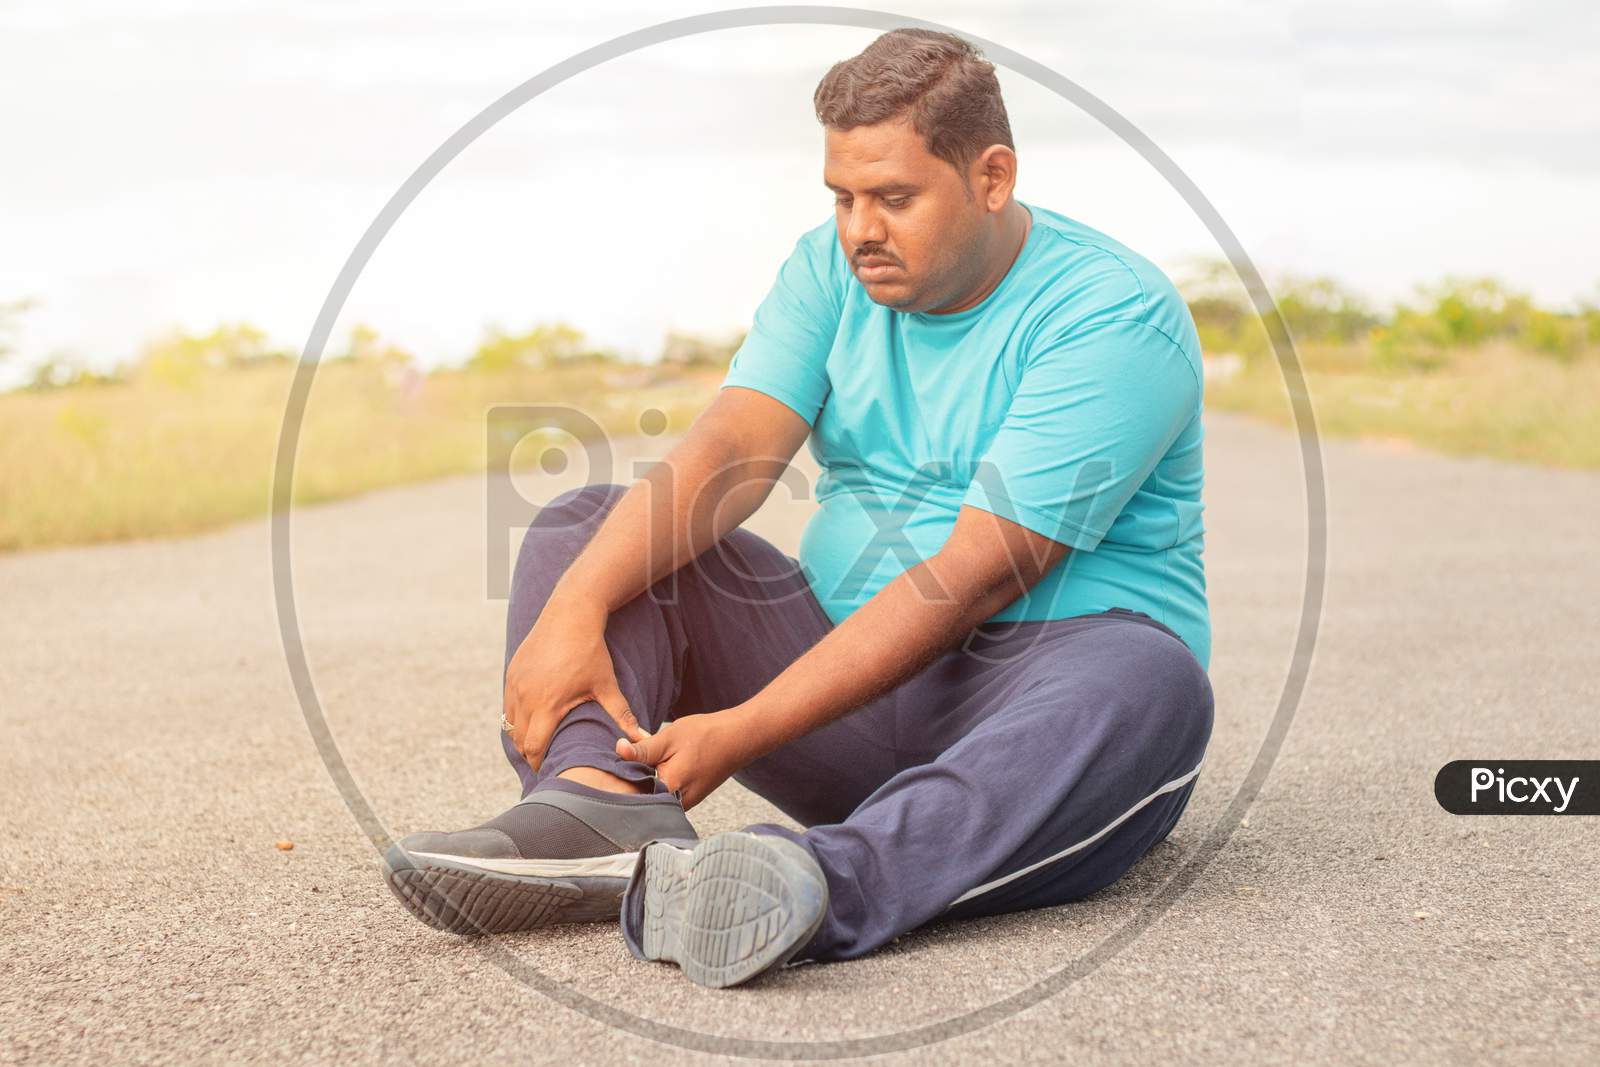 Concept Of Leg Tendon Injury Of Fat Man - Obese Person Holding Leg Suffering Muscle Pain - Overweight Man Fitness Concept At Outdoor Park.